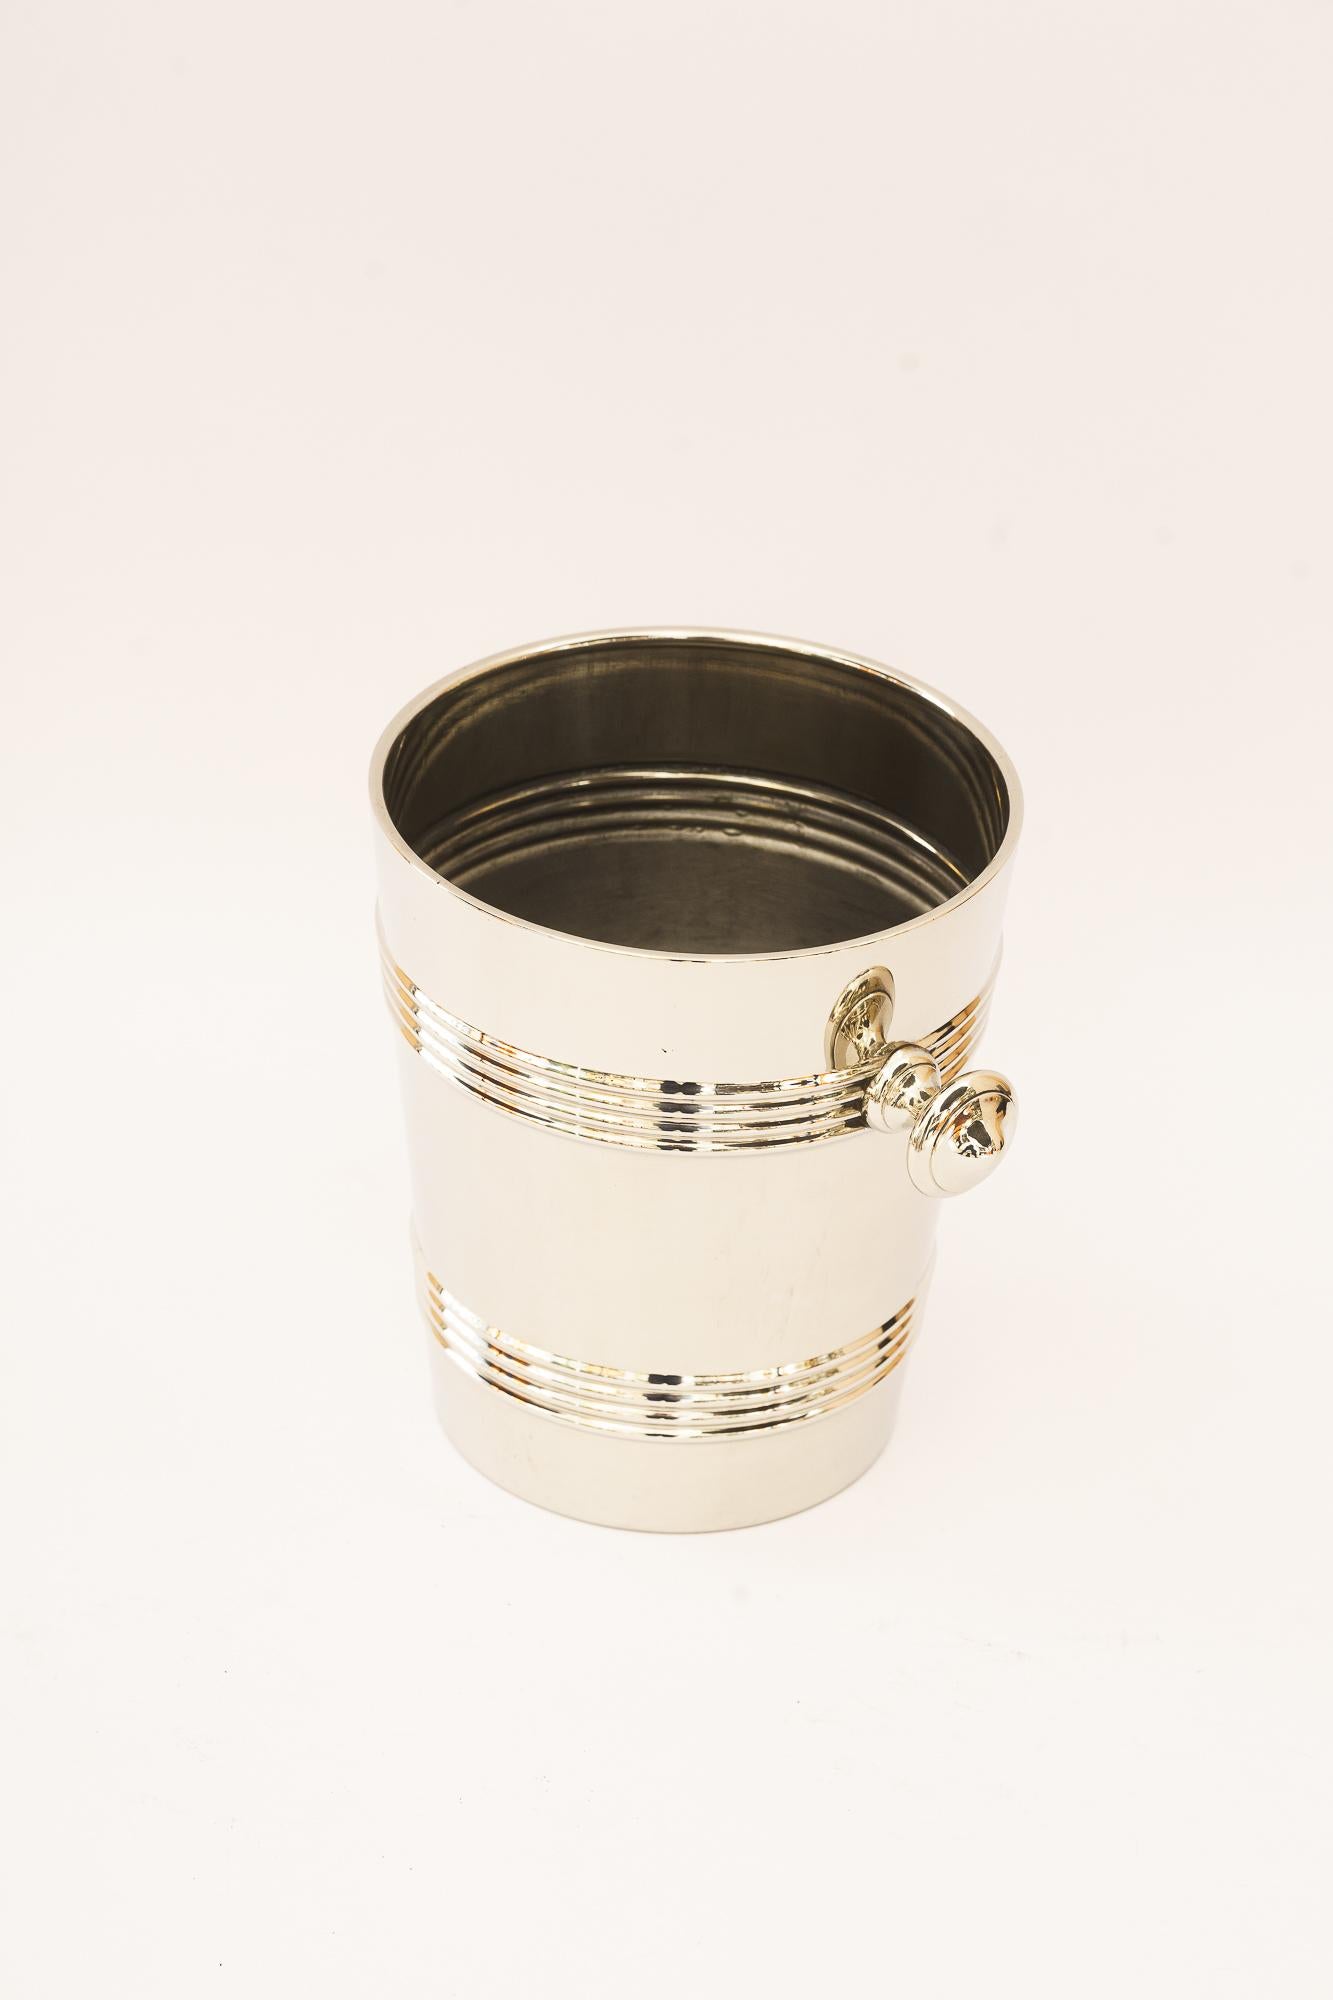 Champagne Bucket Round, 1920s 'Alpaca '
Polished and stove enameled